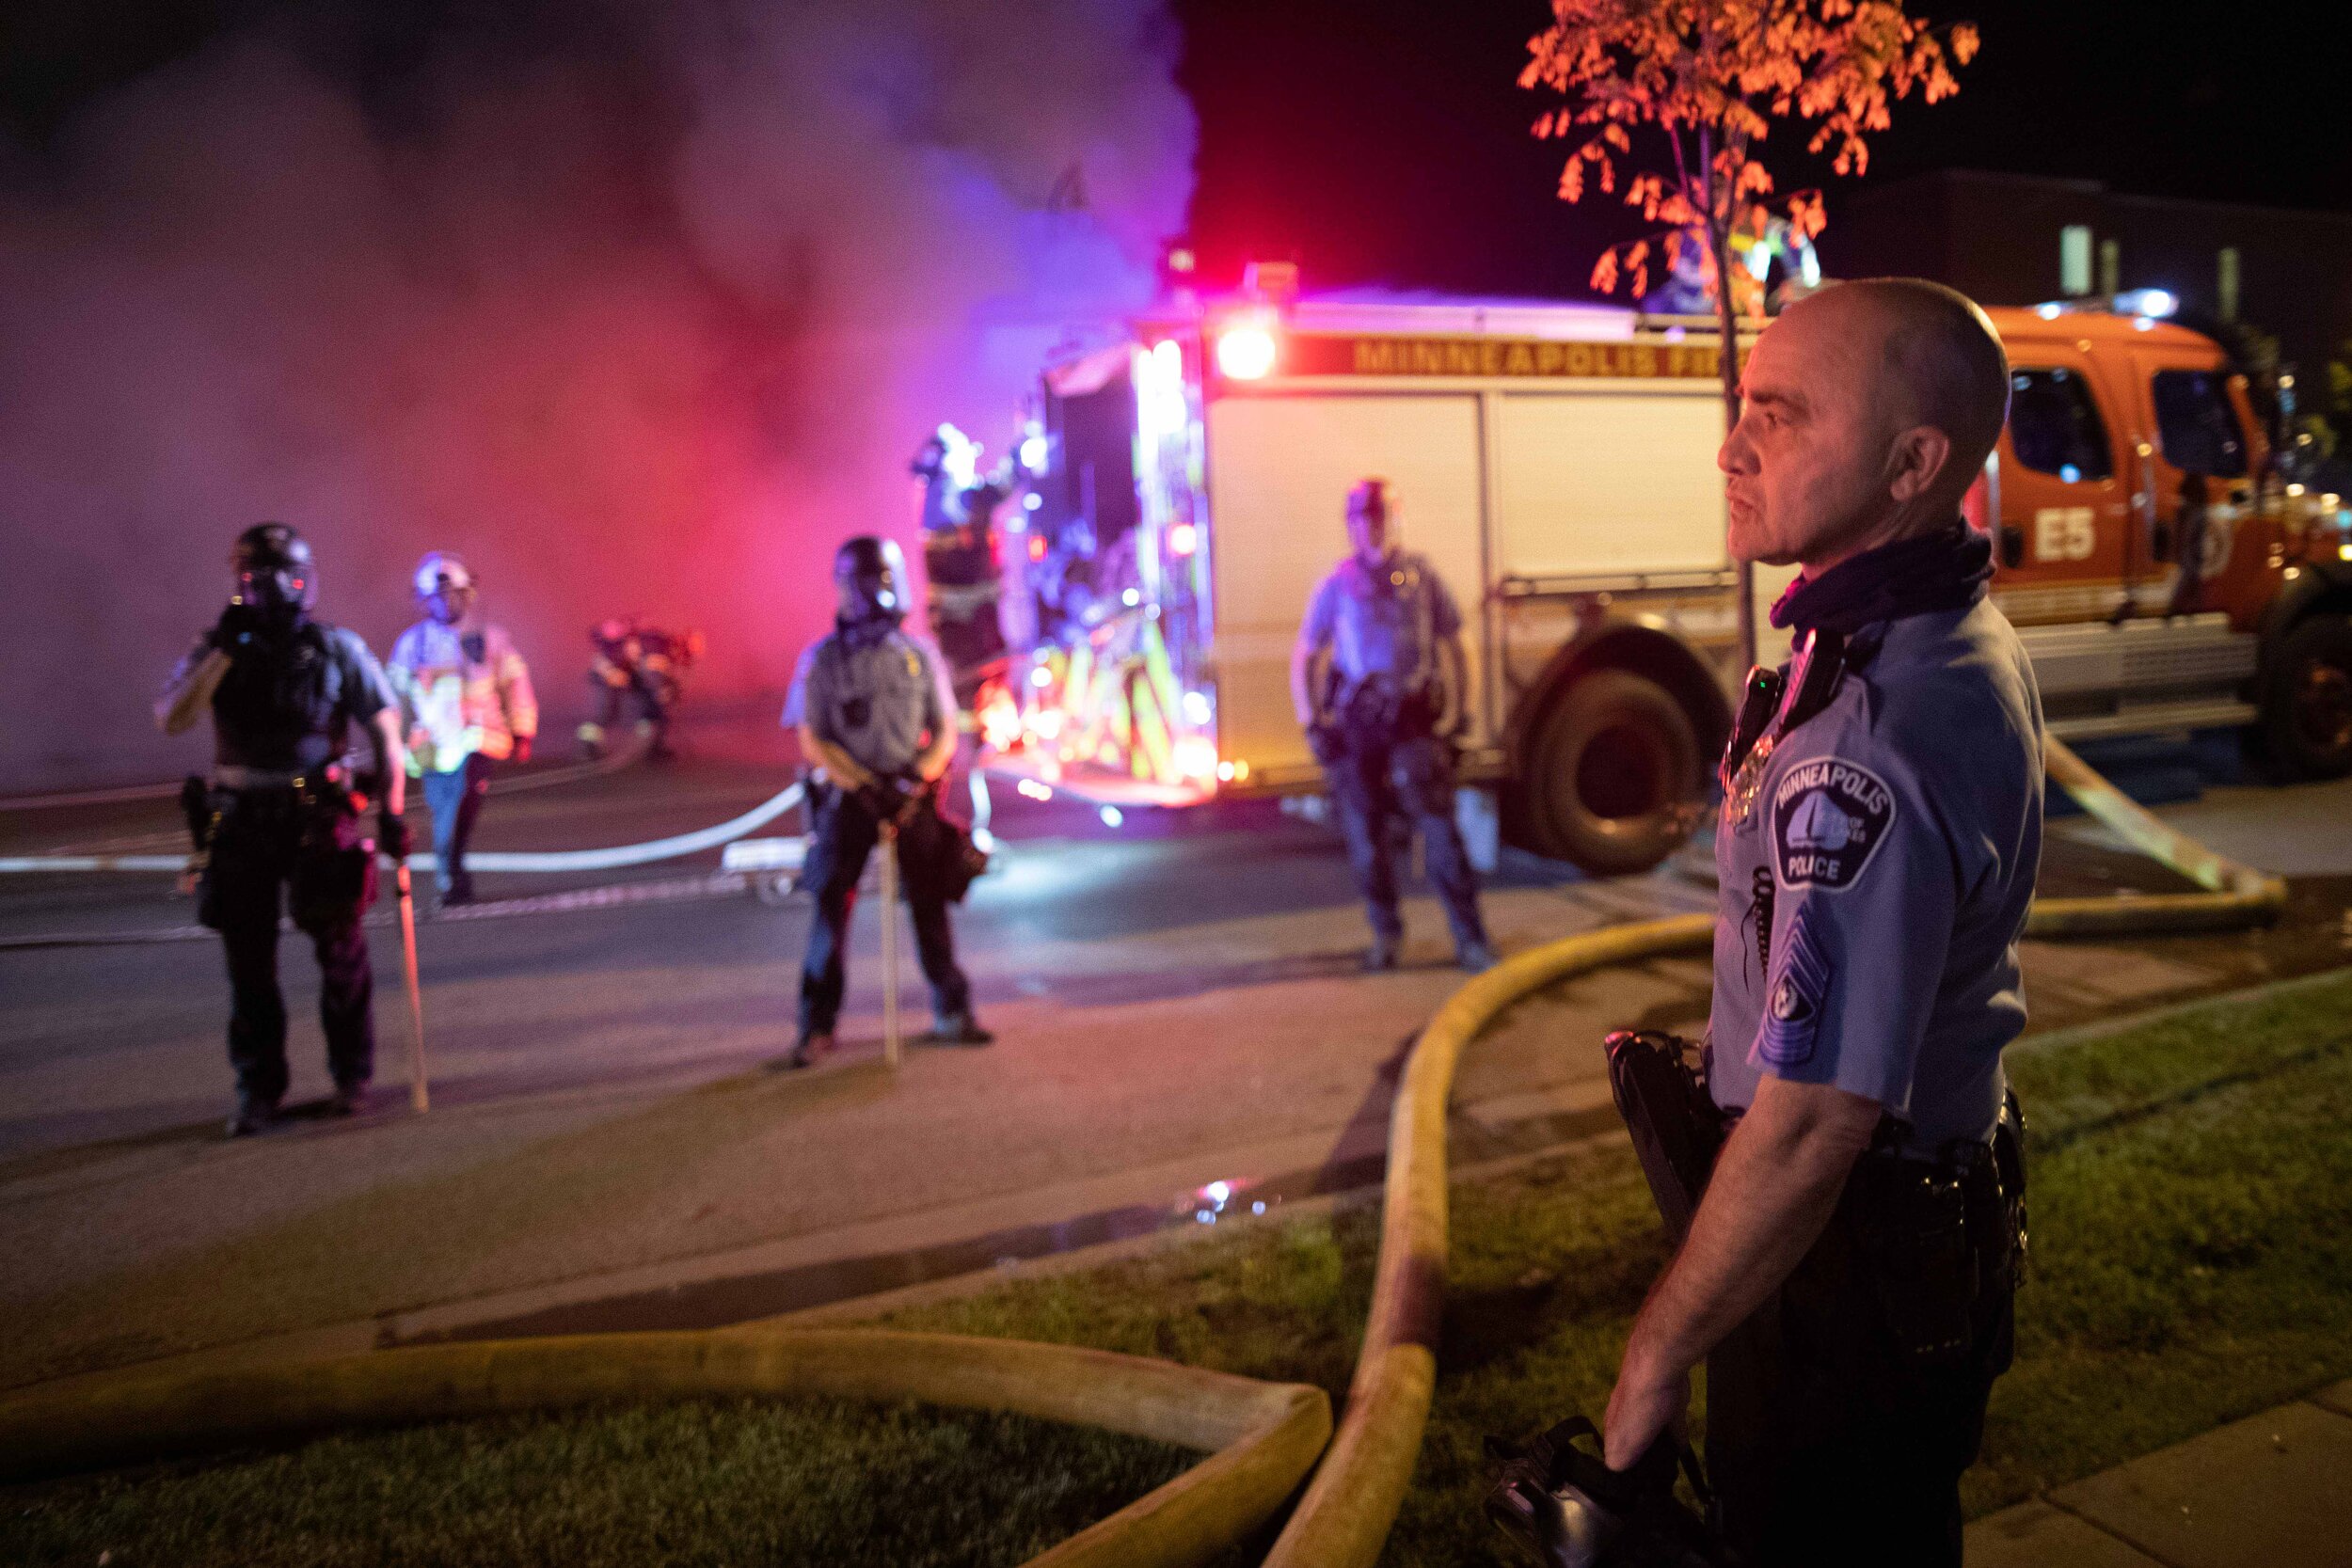  An officer with the Minneapolis Police Department stands in front of other officers as they create a police line to protect the fire department as they extinguish a fire set during a riot over the police killing of George Floyd in Minneapolis, Minne